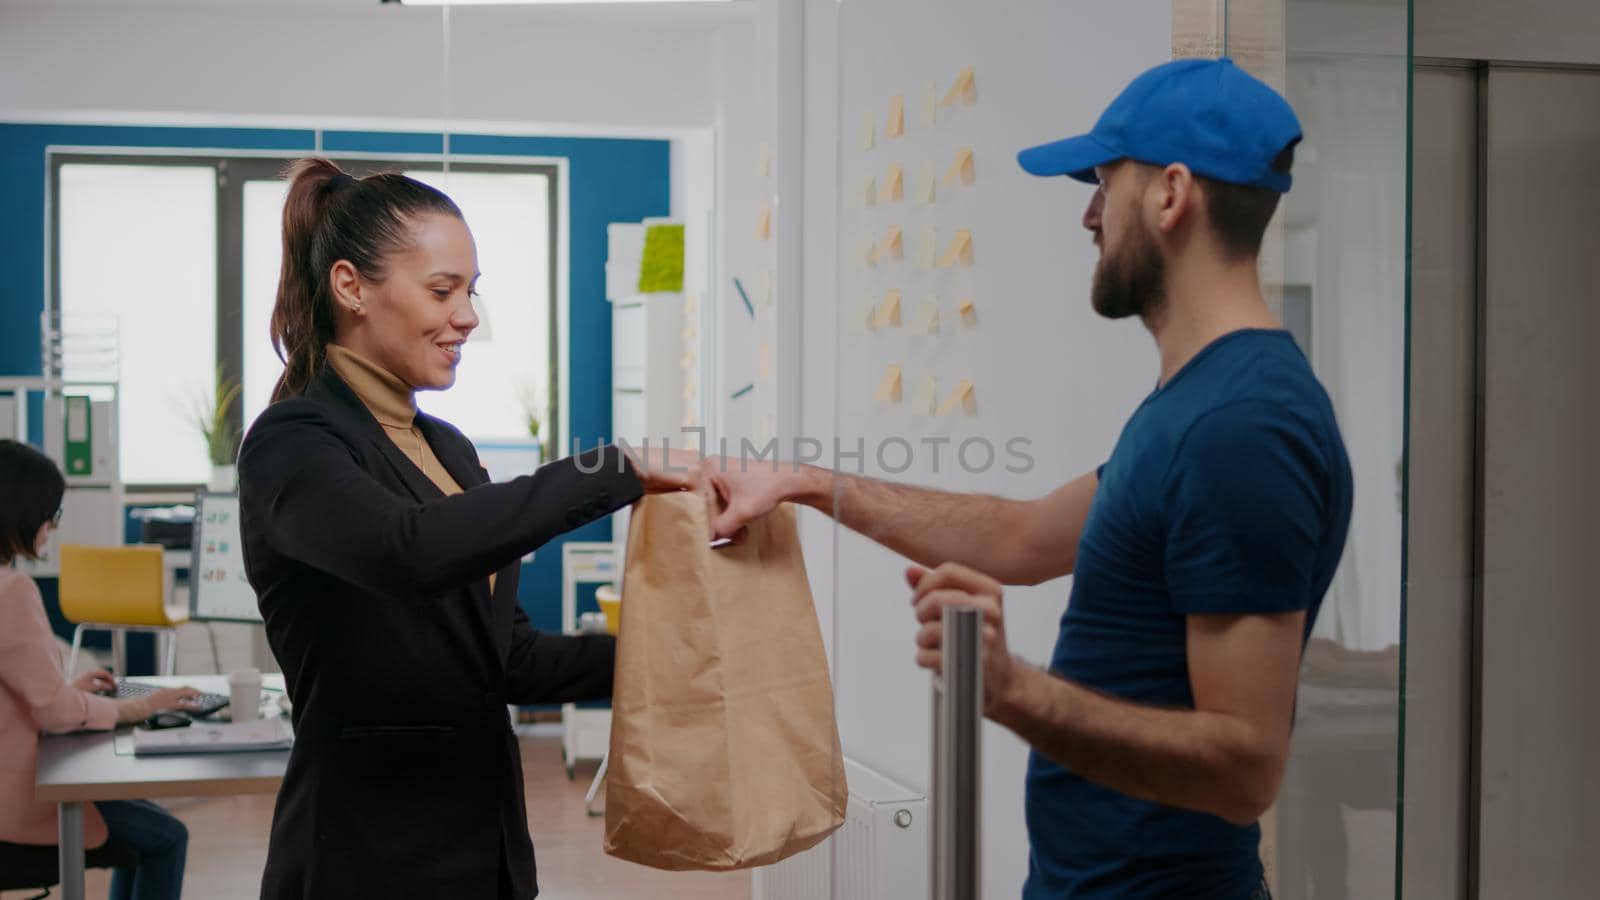 Delivery man giving takeaway package with food order to businesswoman working in startup business company office. Takeout fastfood delivery in corporate job place, lunch meal break paper bag